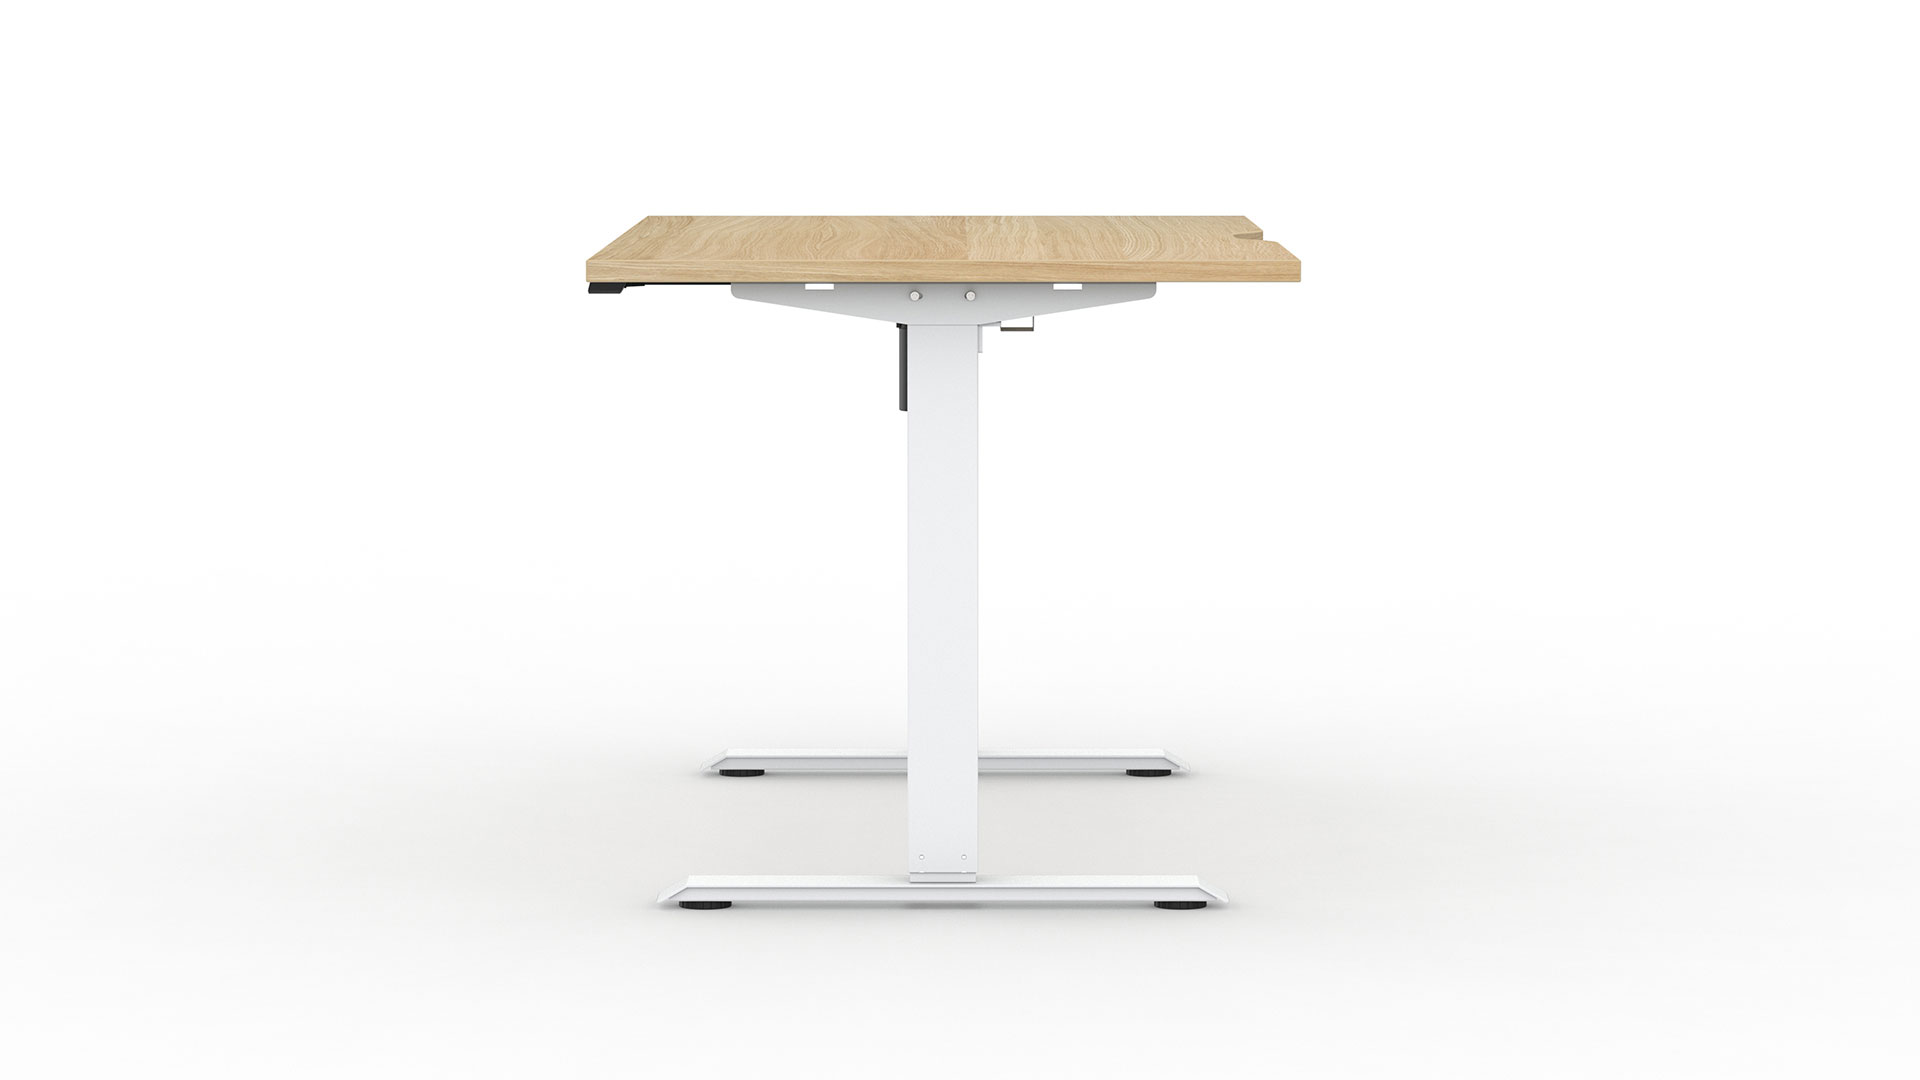 Alto 1 desks feature 2-stage reversed rectangular columns with single motor.